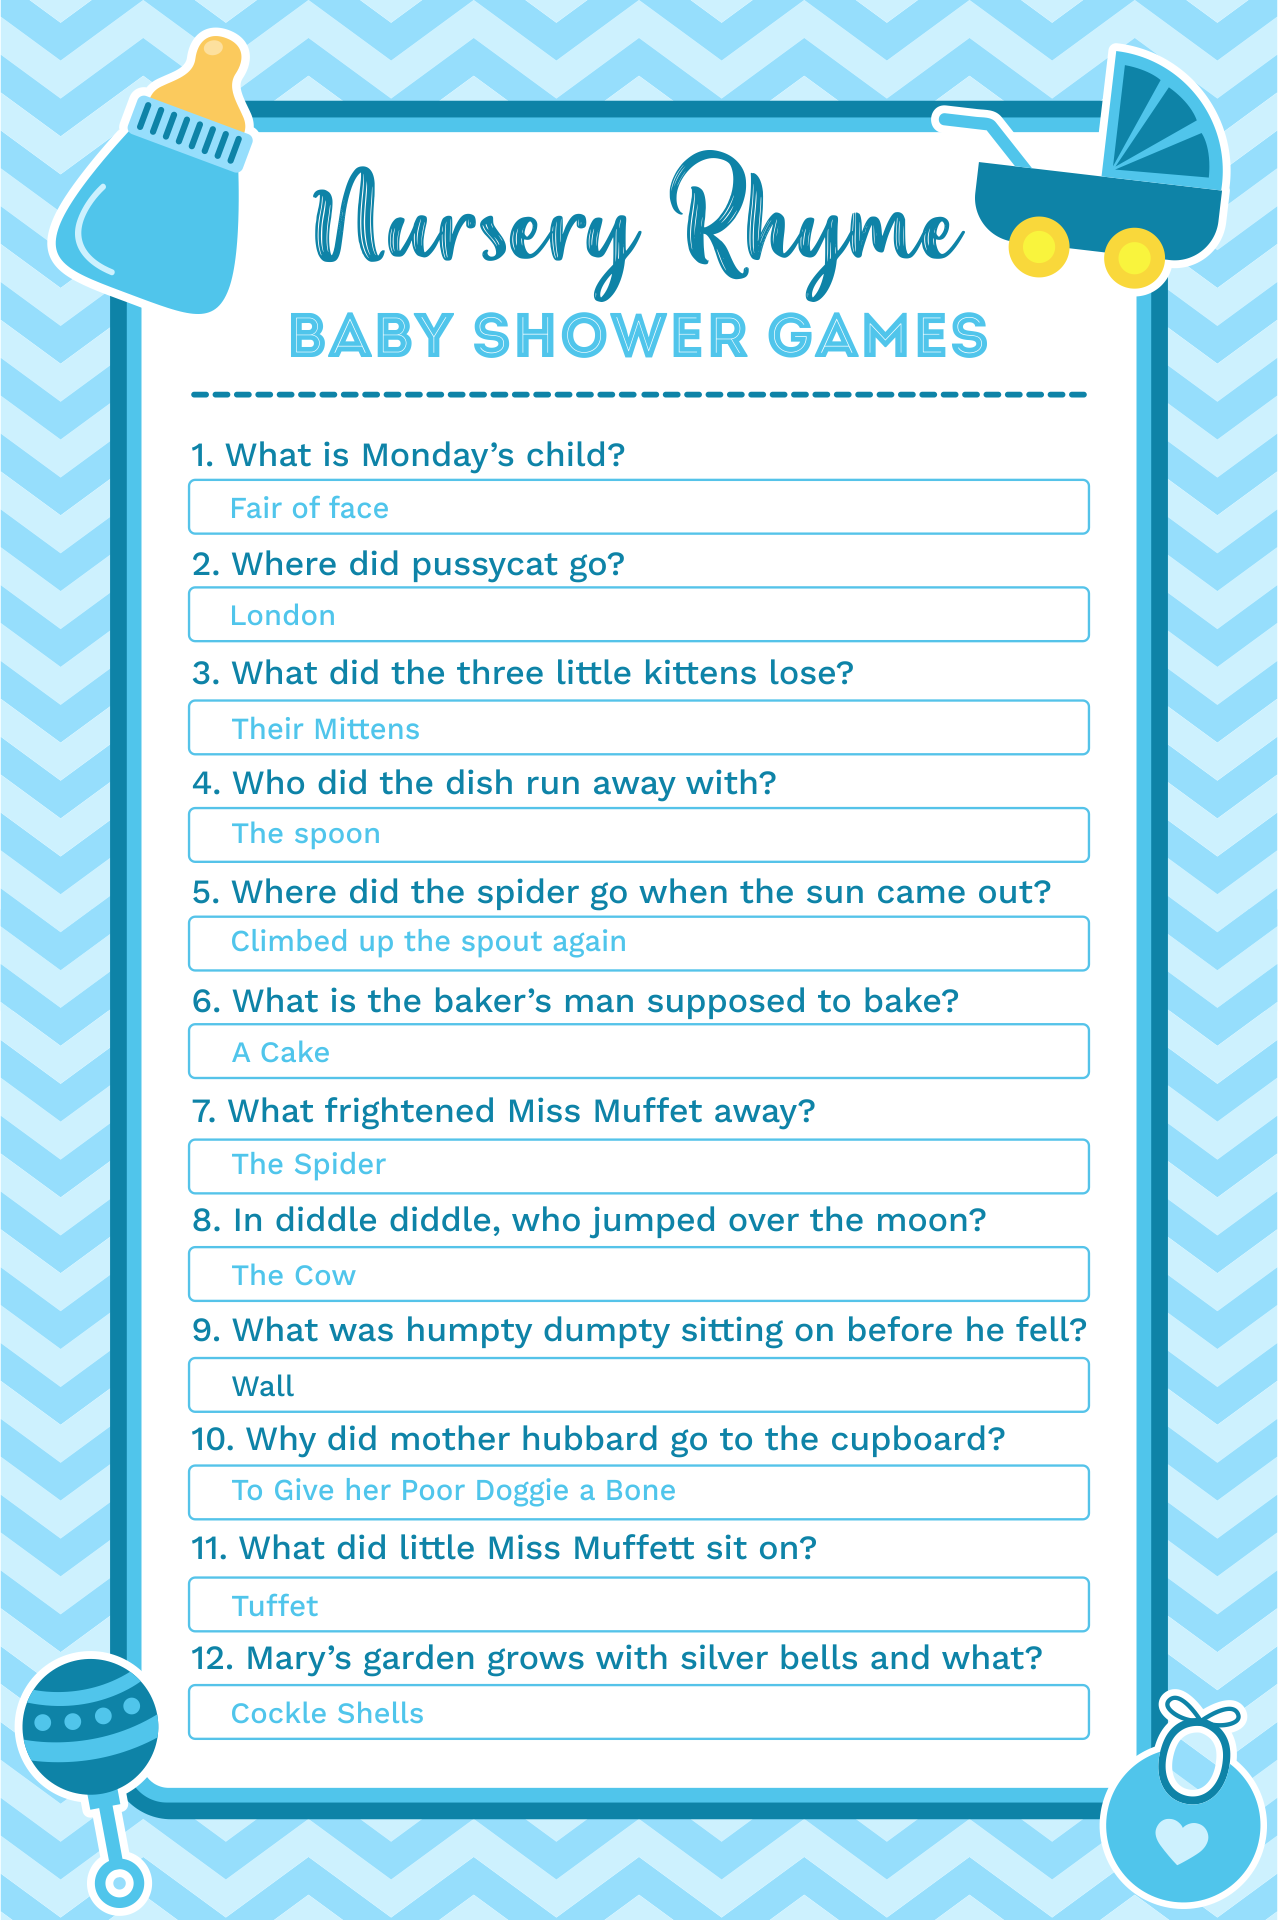 Baby Shower Nursery Rhyme Game Answers